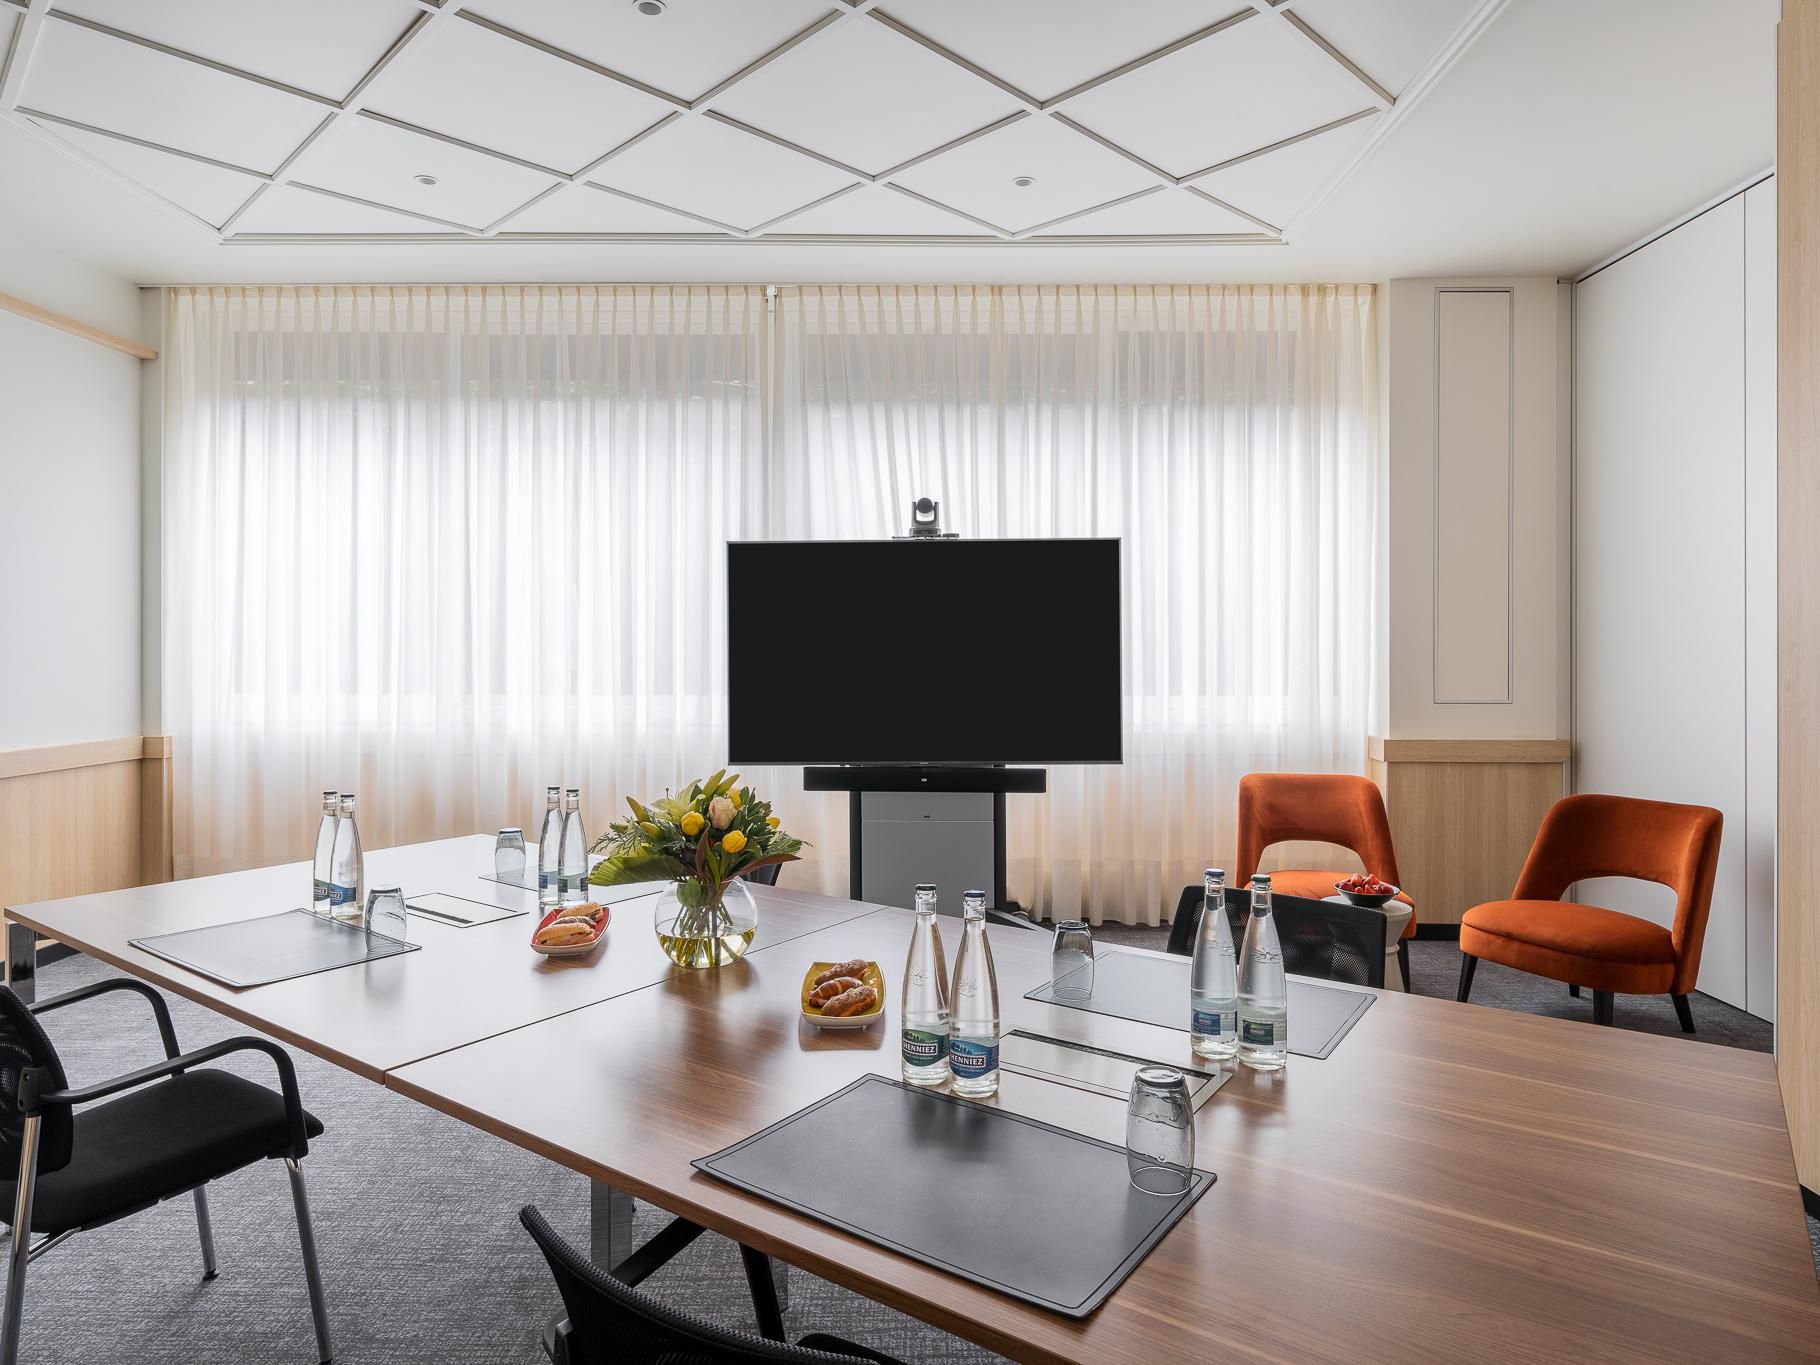 Hybrid Meeting – Choose this flexible solution for your next meeting, complemented by dedicated service. A LED TV with a StarLeaf system and compatible meeting spaces.